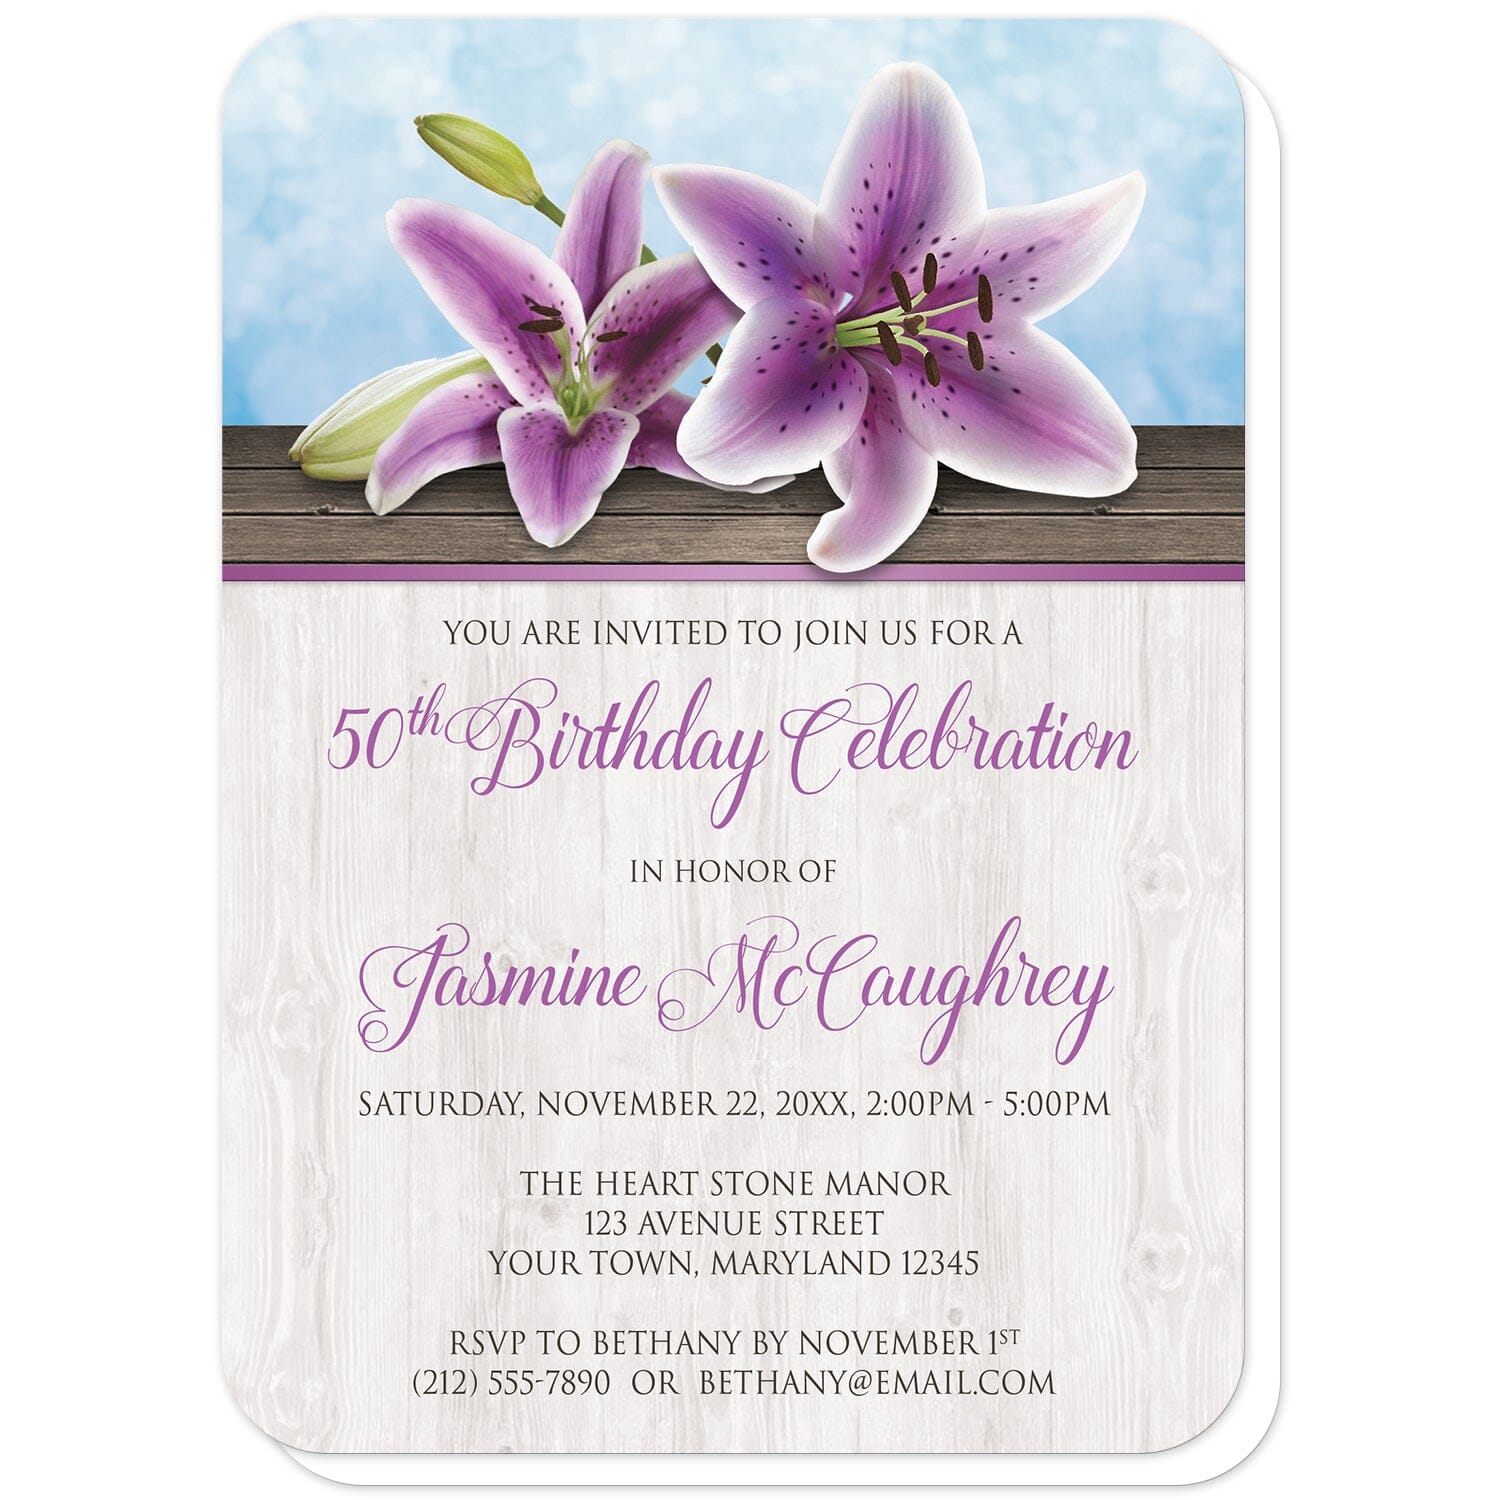 Pretty Floral Wood Purple Lily Birthday Invitations (with rounded corners) at Artistically Invited. Purple lily birthday invitations designed with two purple lilies on a wood surface, over a blue background design. Your personalized birthday party details are custom printed in purple and dark brown over a light wood pattern. This lightly rustic floral design is perfect for spring and summer celebrations.